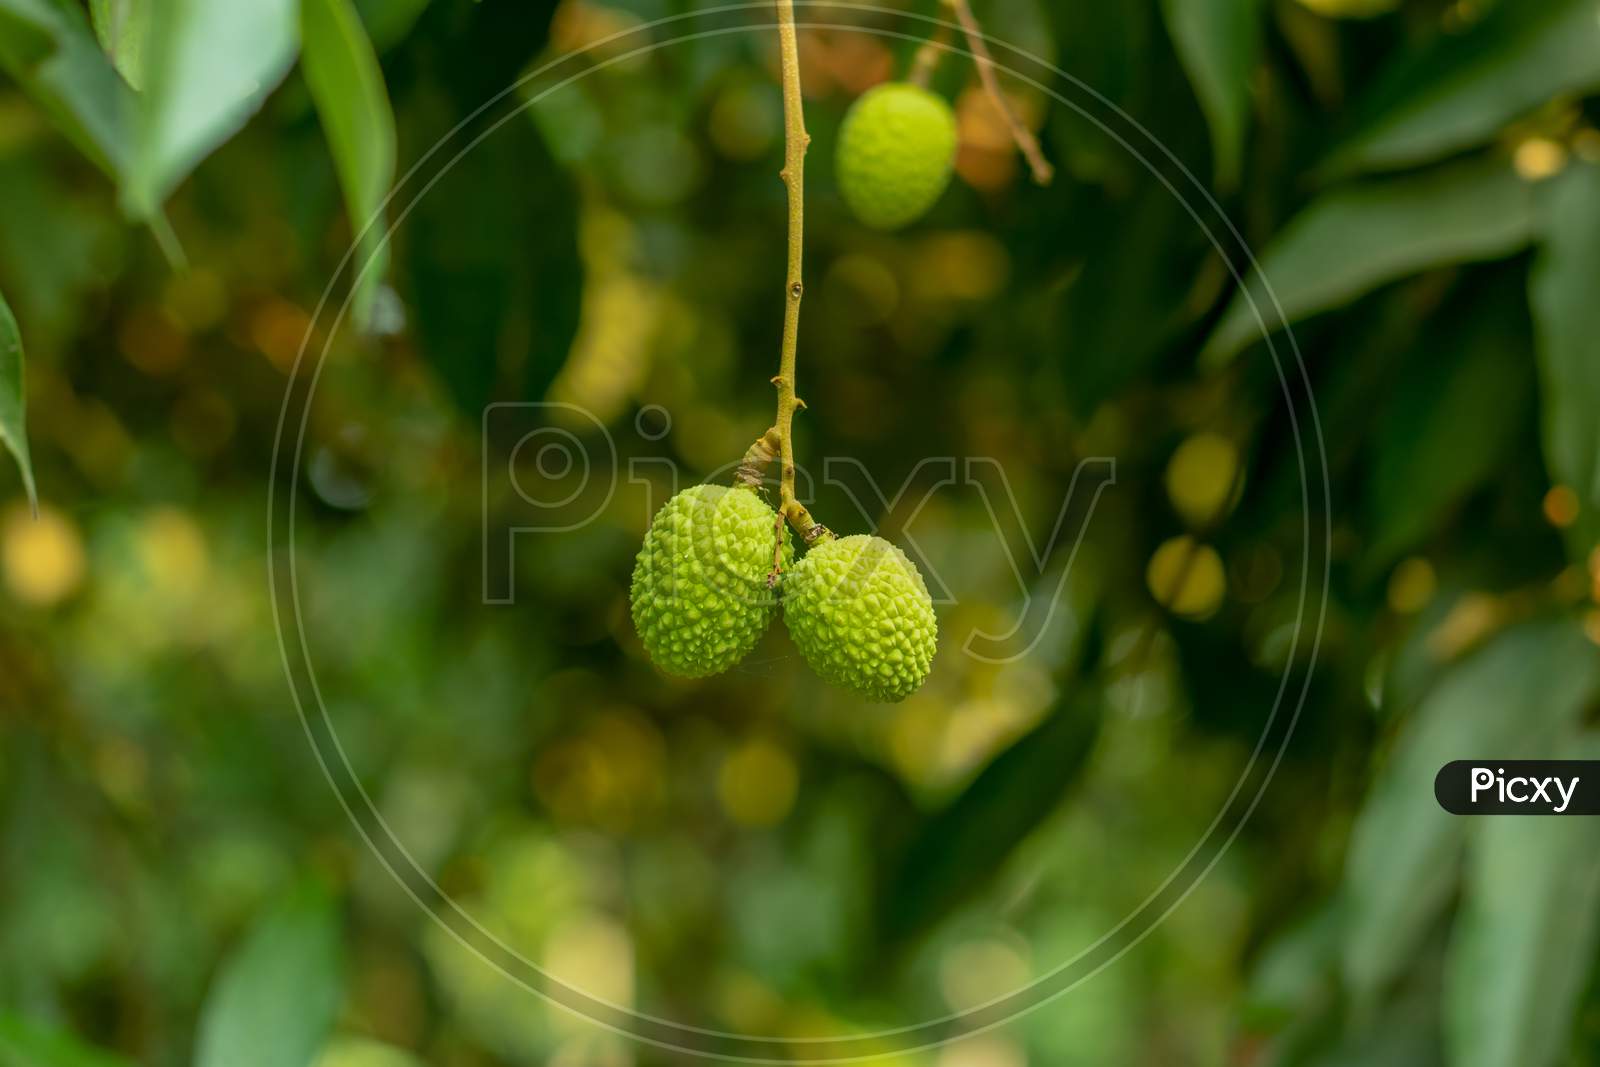 Litchi Or Lichi, An Evergreen Tree And Lychee Is The Genus Litchi